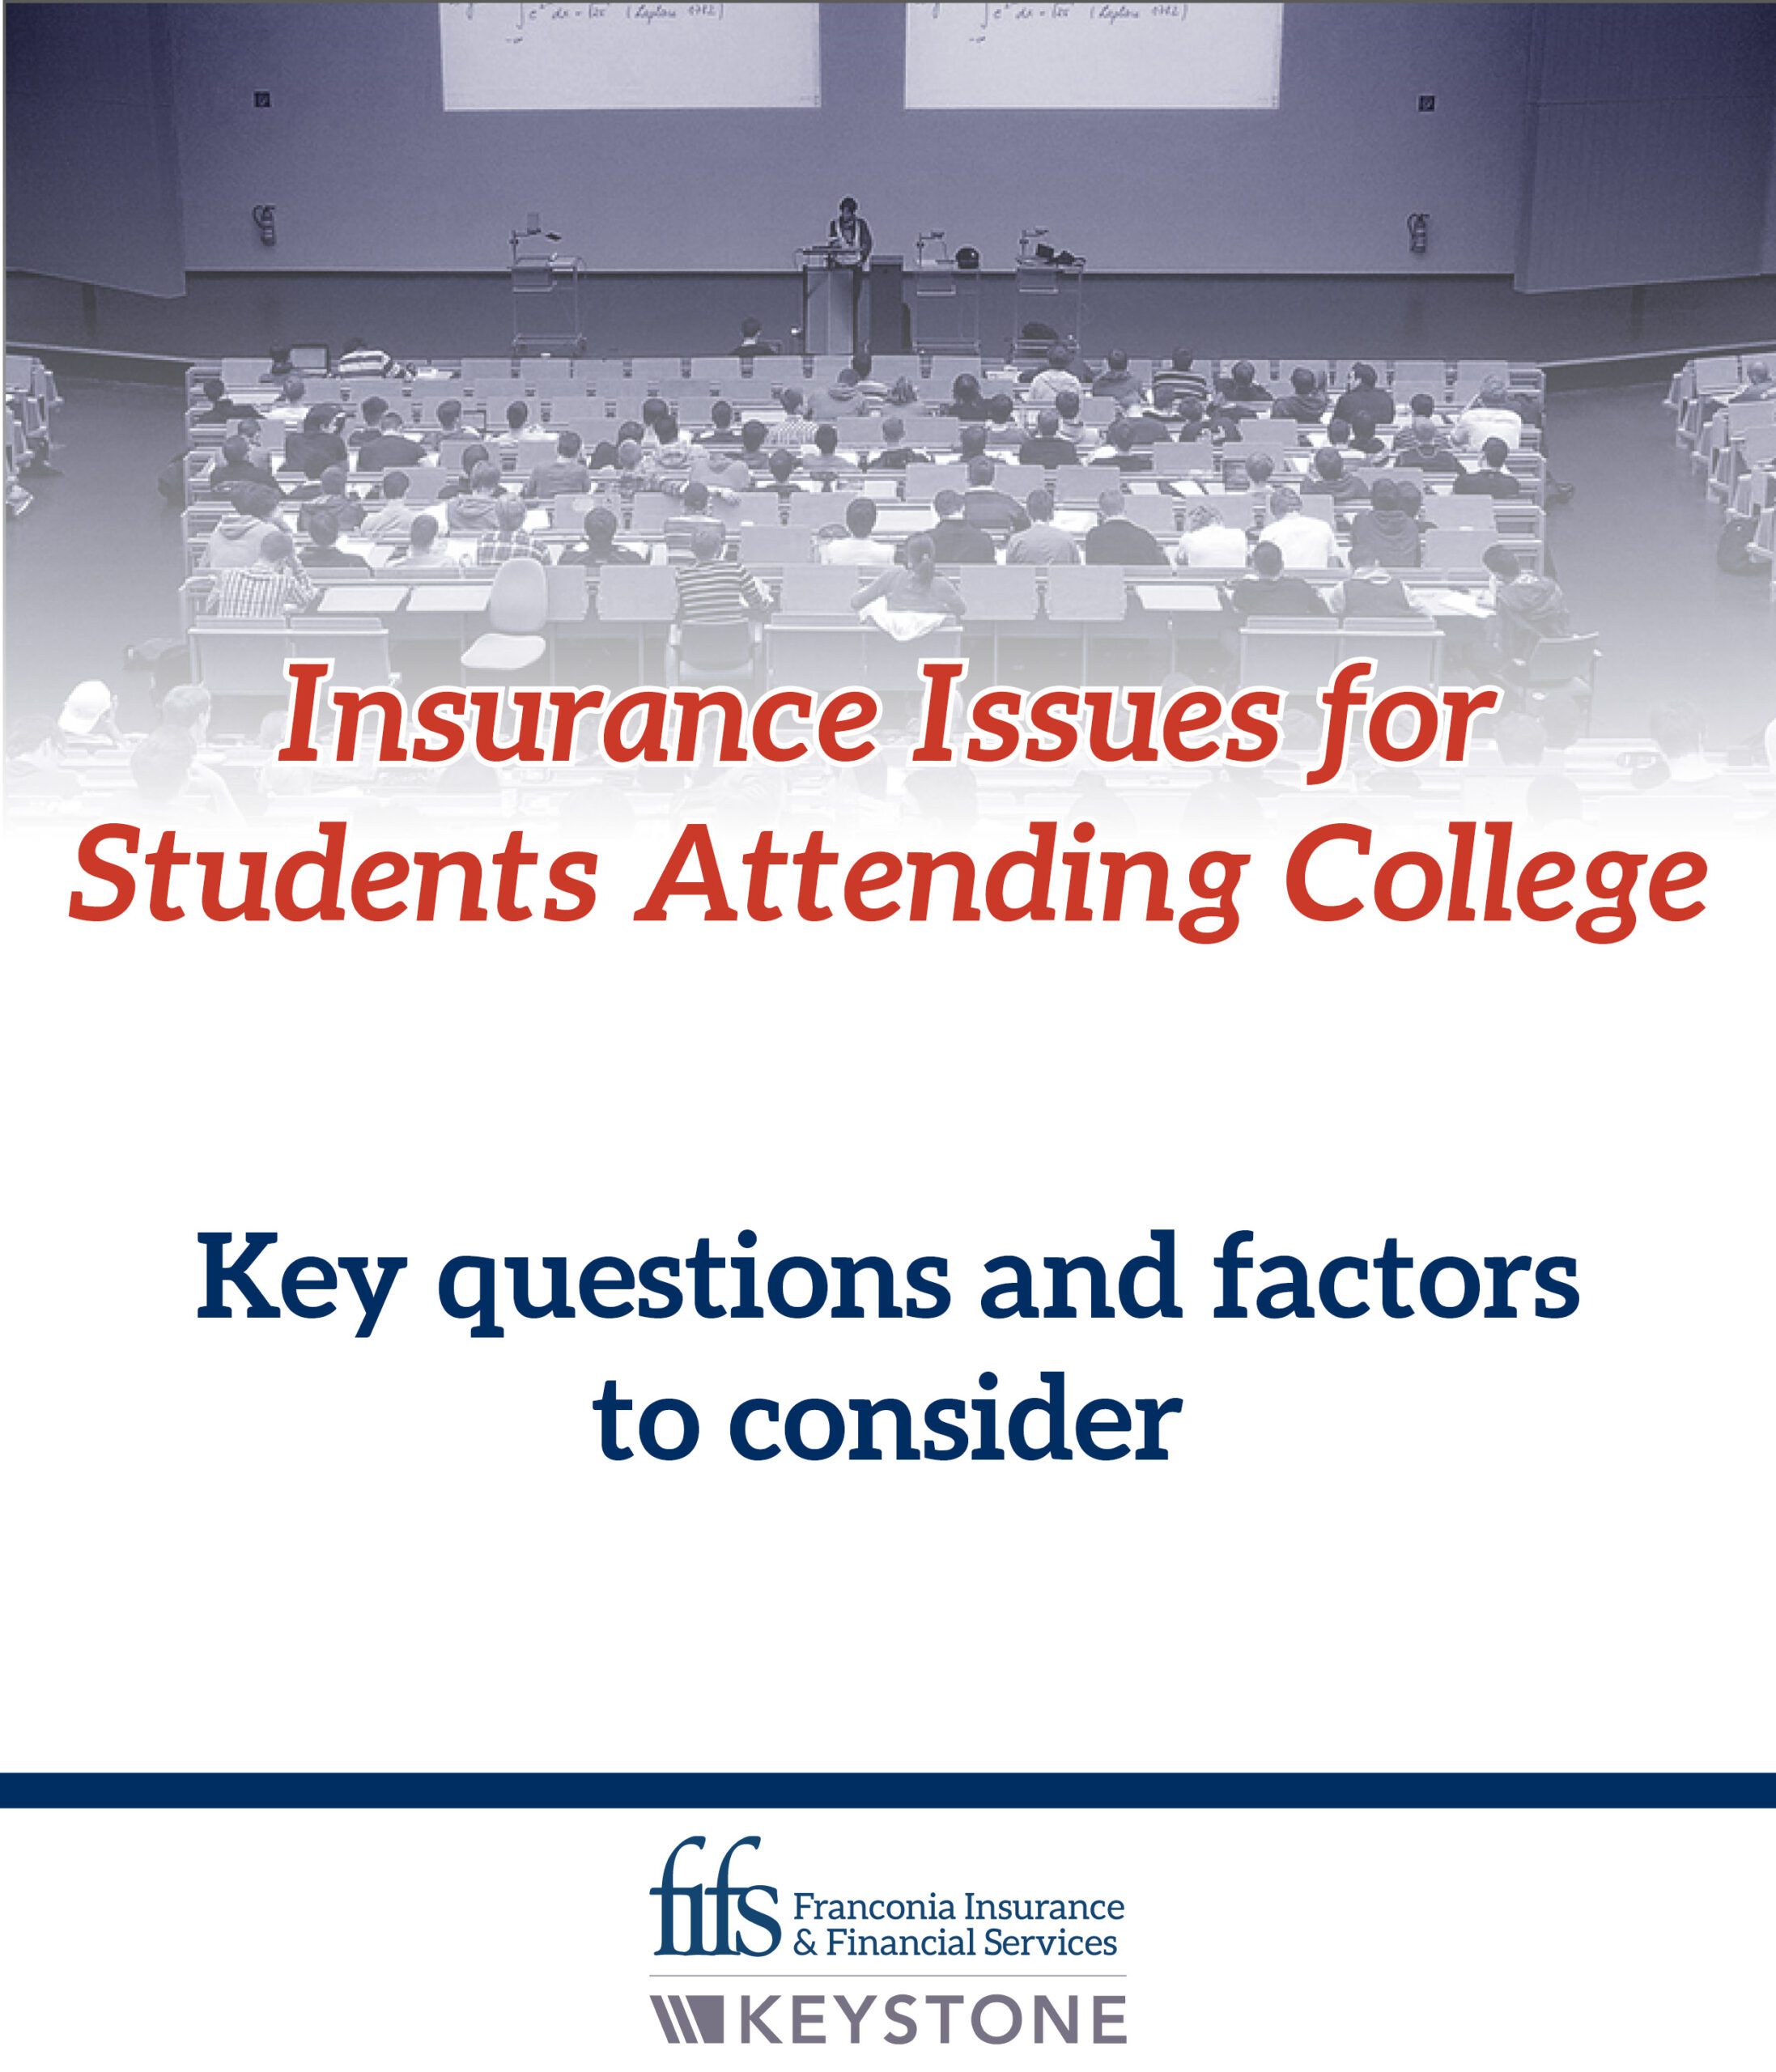 Insurance Issues for Students Attending College